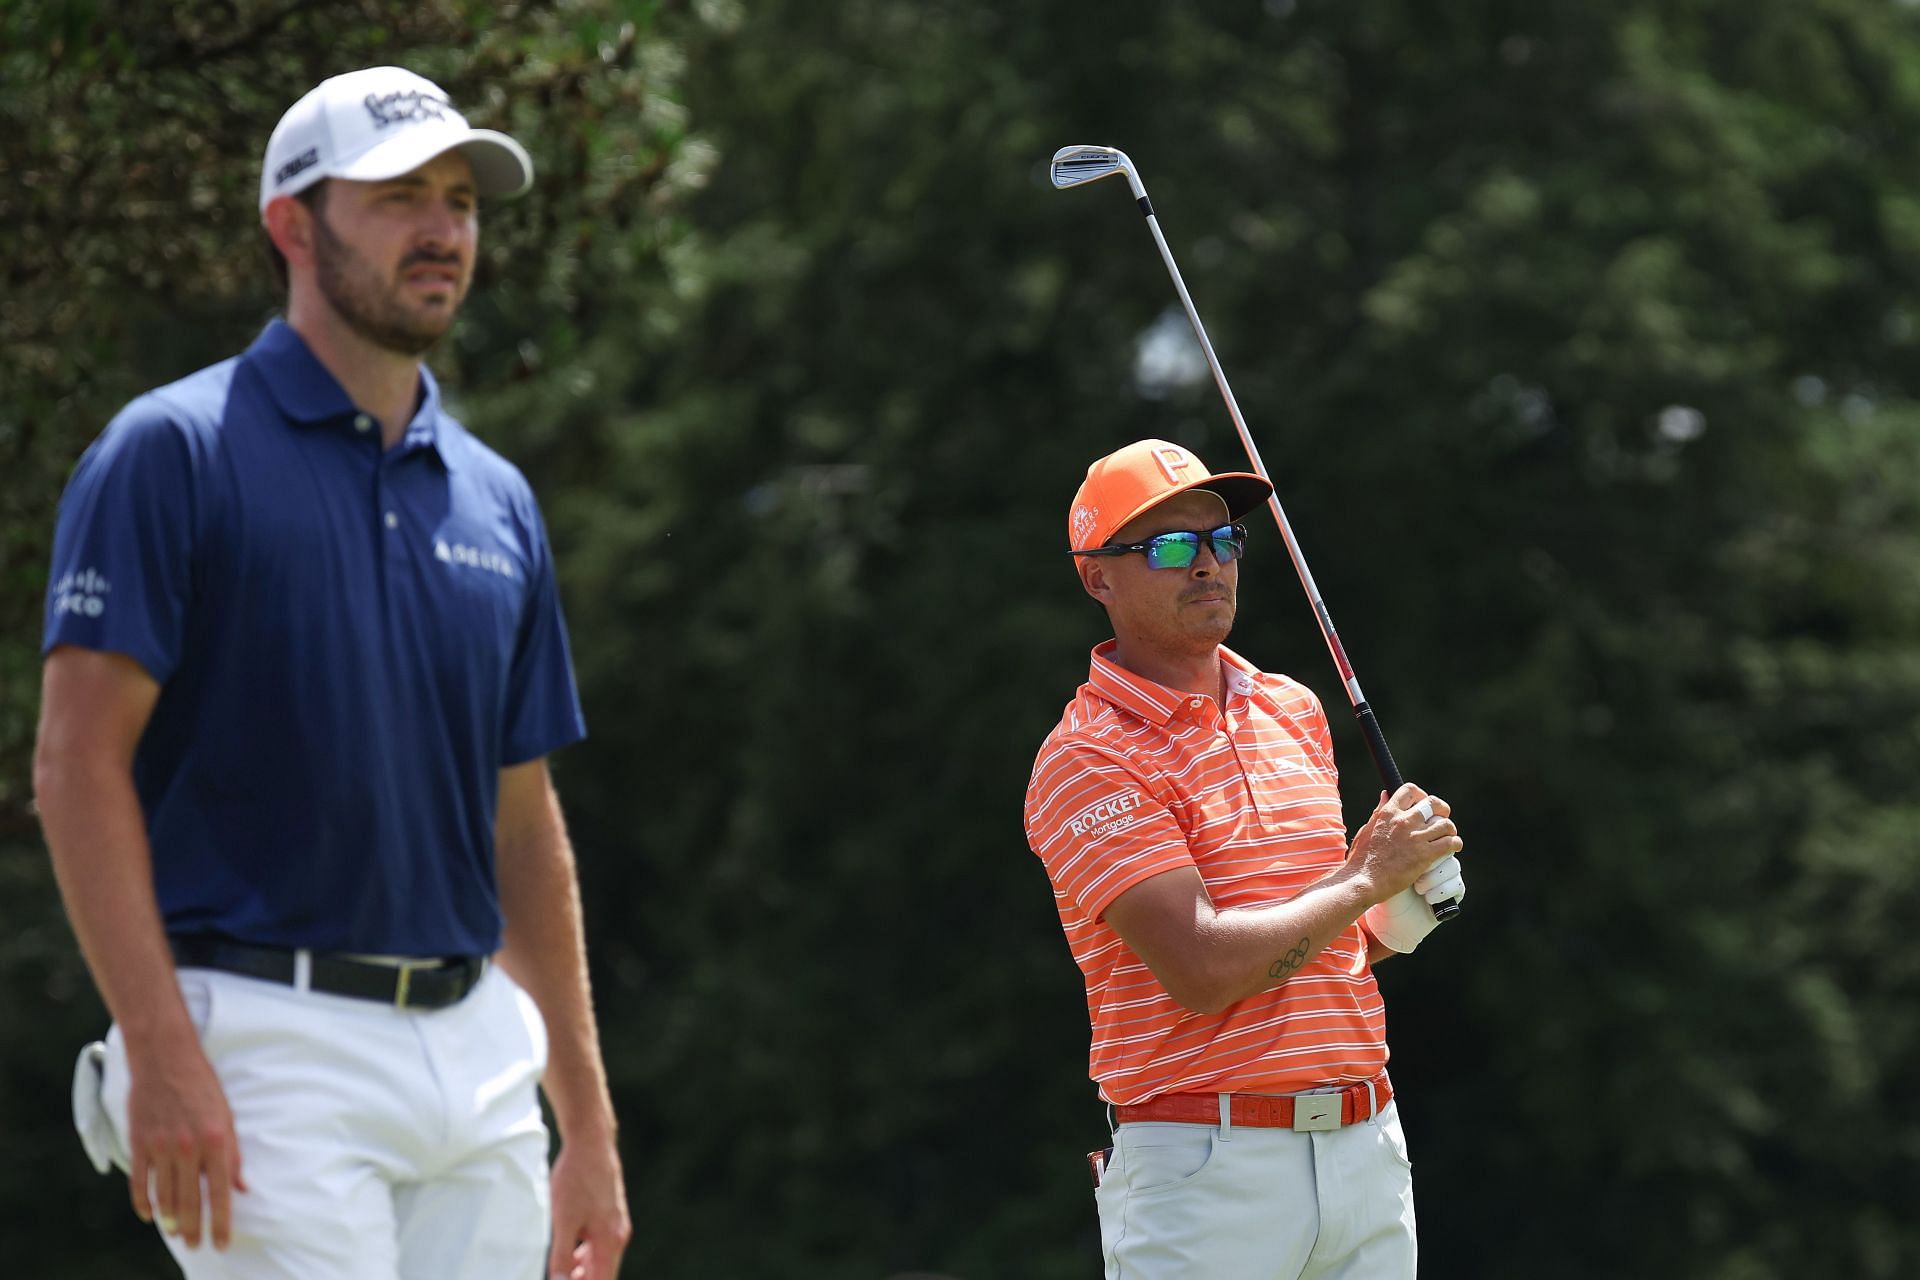 Patrick Cantlay and Rickie Fowler at the 2023 Travelers Championship (Image via Getty).